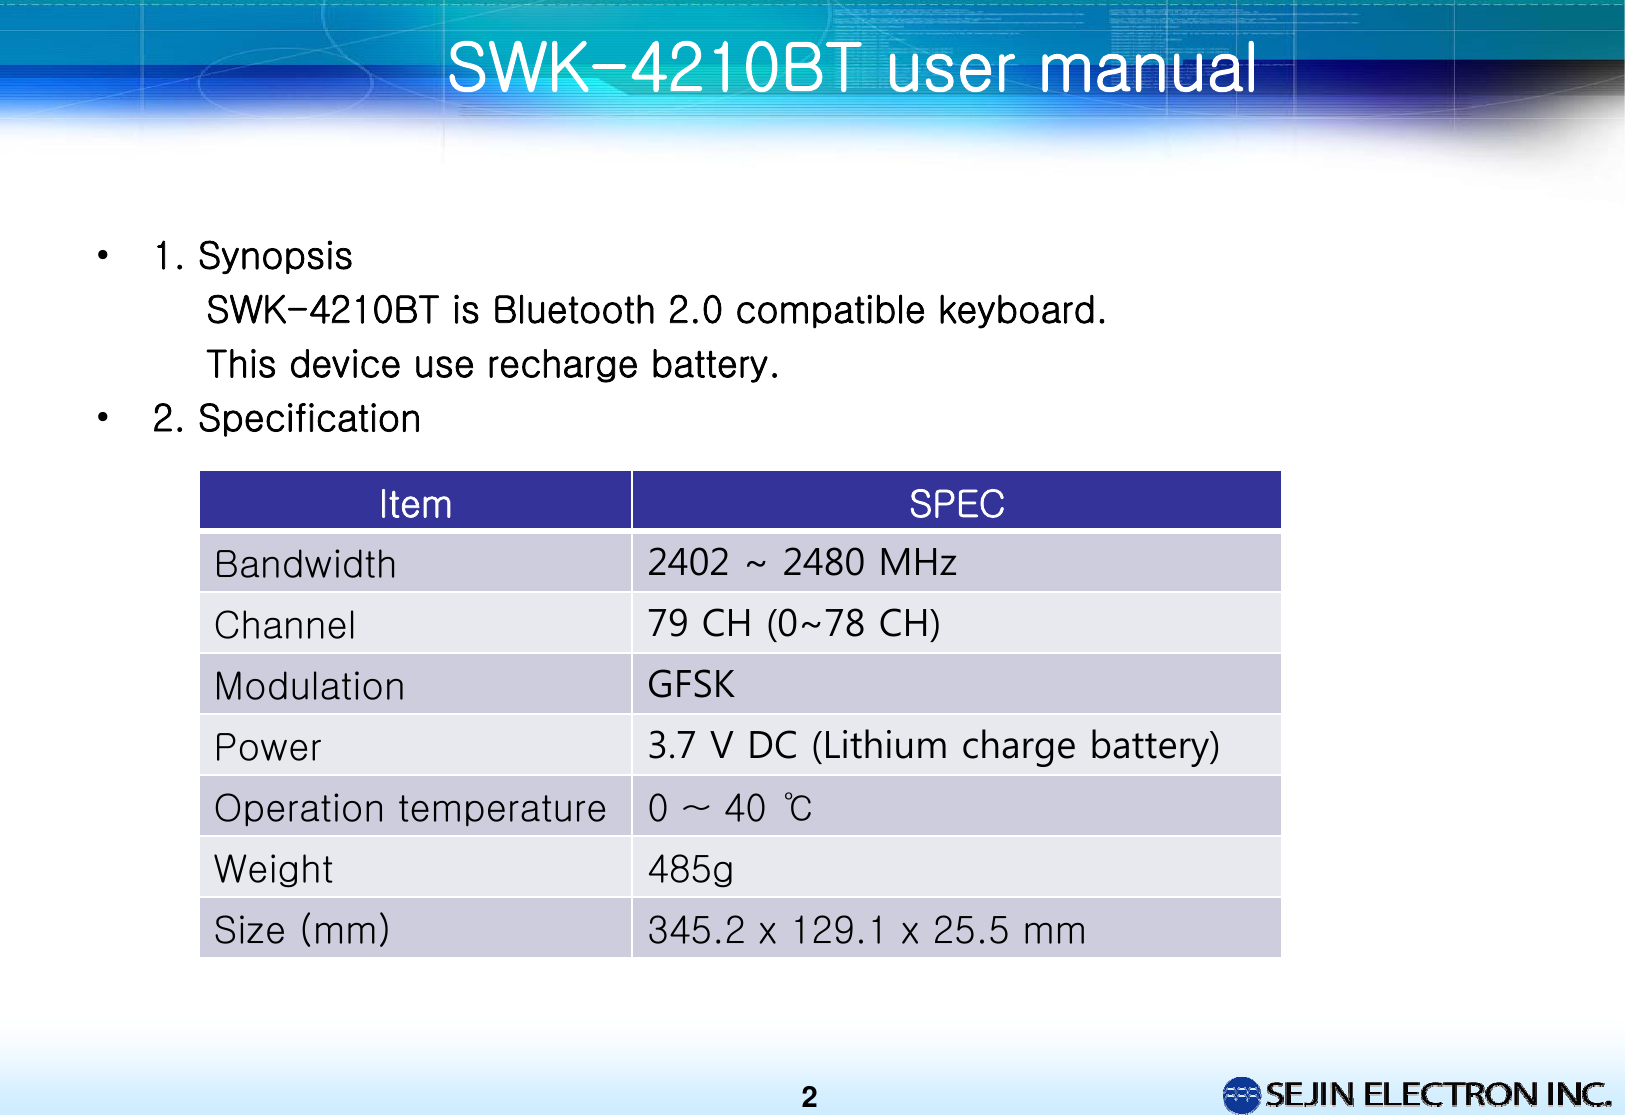 •1. SynopsisSWK-4210BT is Bluetooth 2.0 compatible keyboard.This device use recharge battery.•2. SpecificationSWK-4210BT user manual 2Item SPECBandwidth 2402 ~ 2480 MHzChannel 79 CH (0~78 CH)Modulation GFSKPower 3.7 V DC (Lithium charge battery)Operation temperature 0 ~ 40 ℃Weight 485gSize (mm) 345.2 x 129.1 x 25.5 mm 